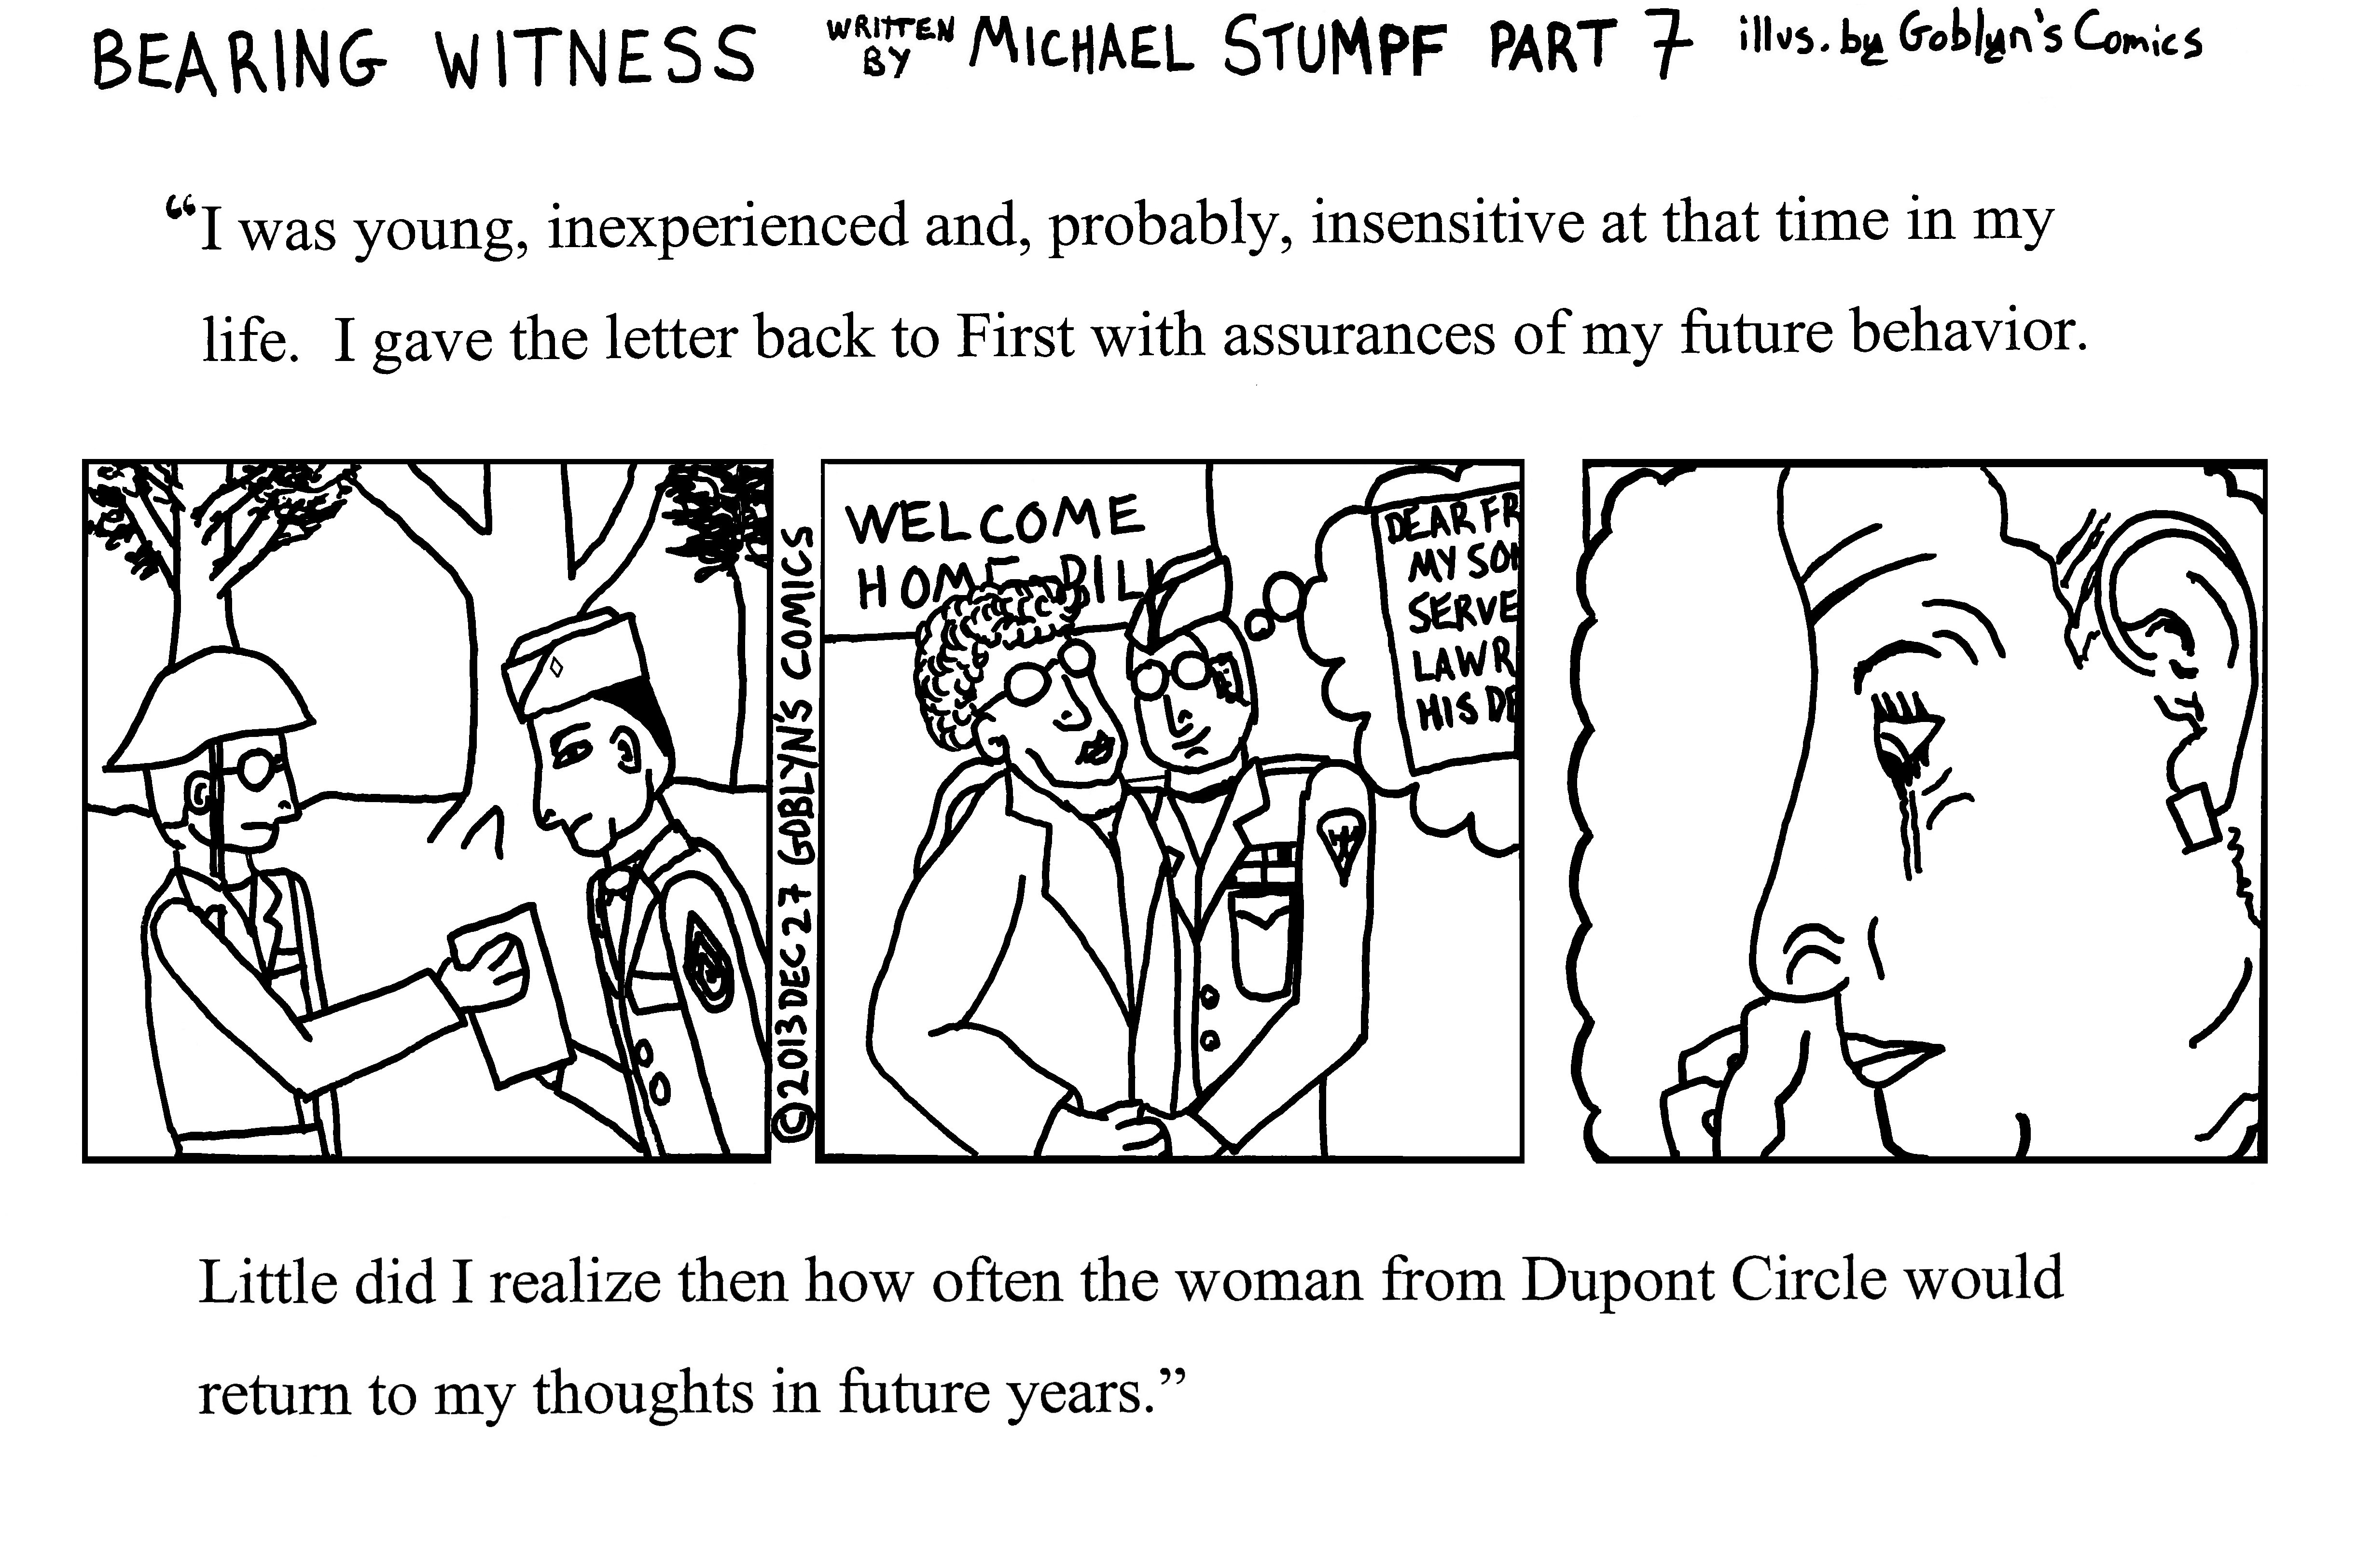 Bearing Witness by Michael Stumpf, Part 7, illustrated by Goblyn's Comics